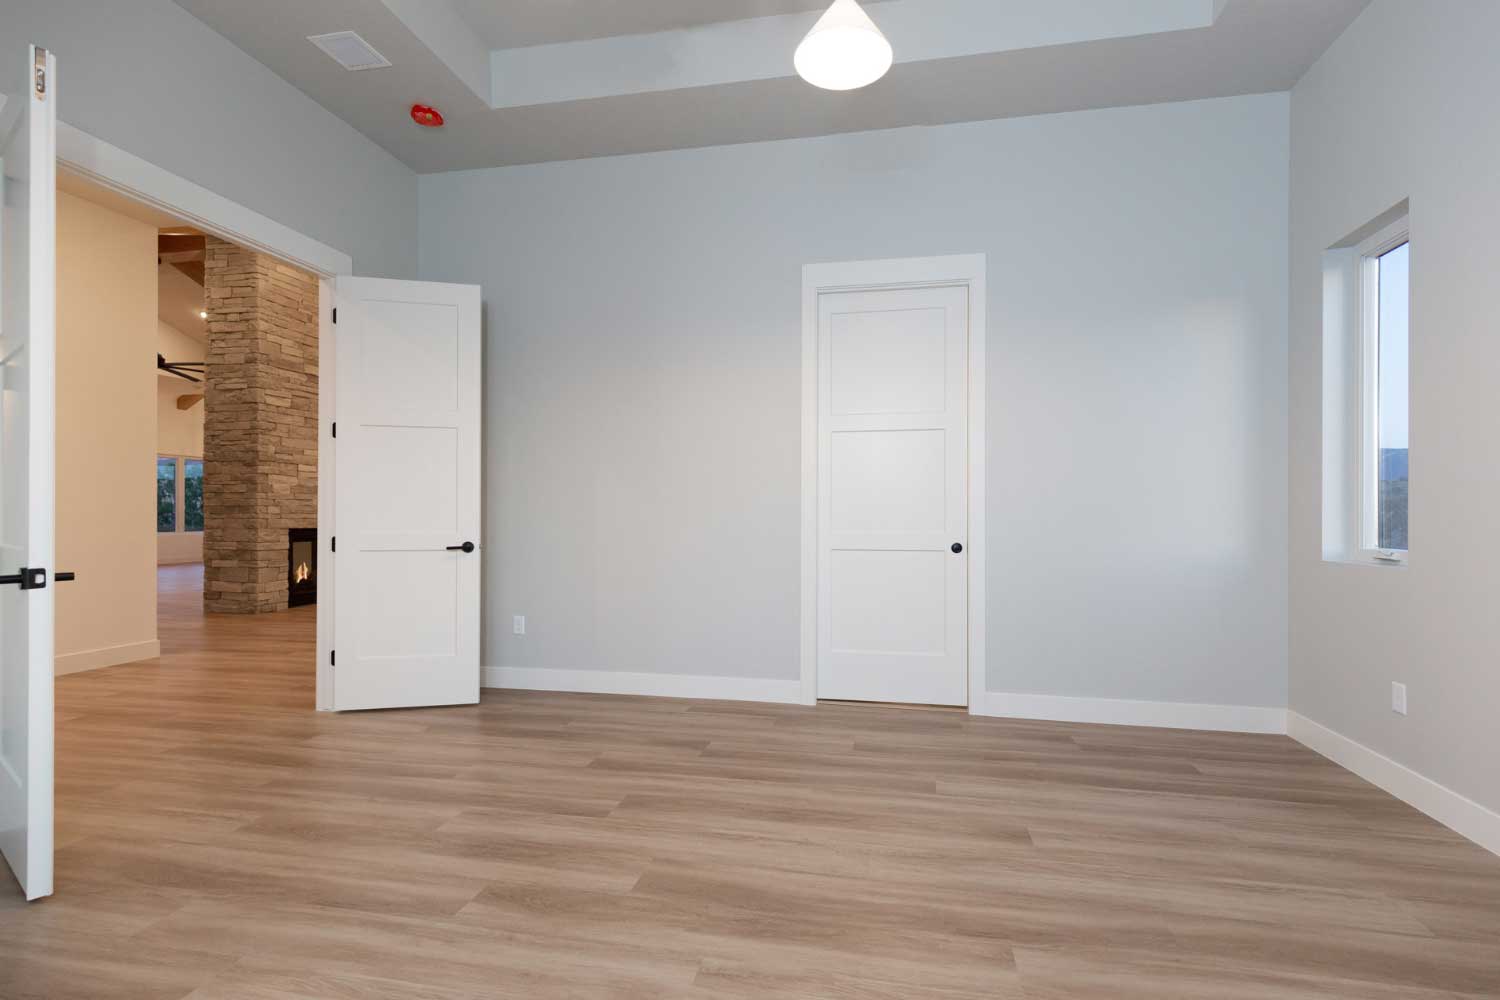 Bedroom featuring hardwood floors, light gray colored walls and tray ceiling